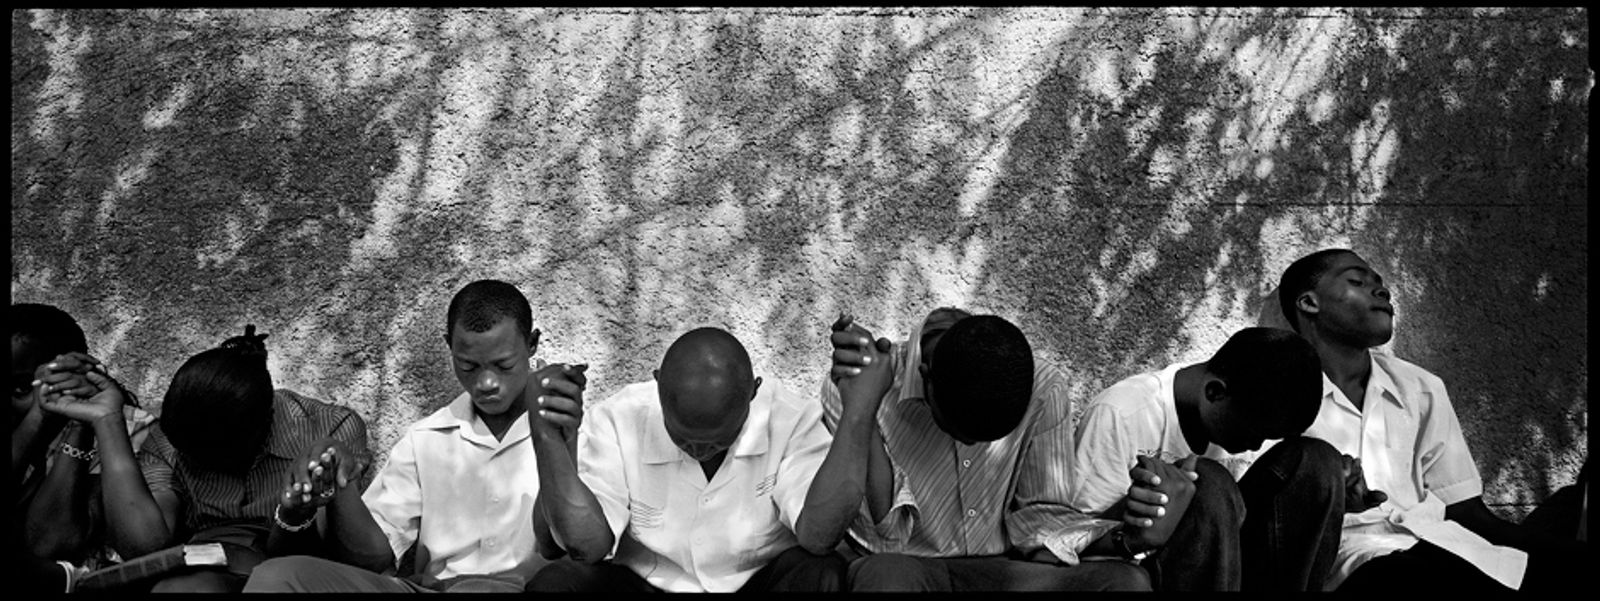 © Benjamin Rusnak - In the weeks after the quake, Haitians turn - as they always do - to prayer and faith as the catalyst for their healing.